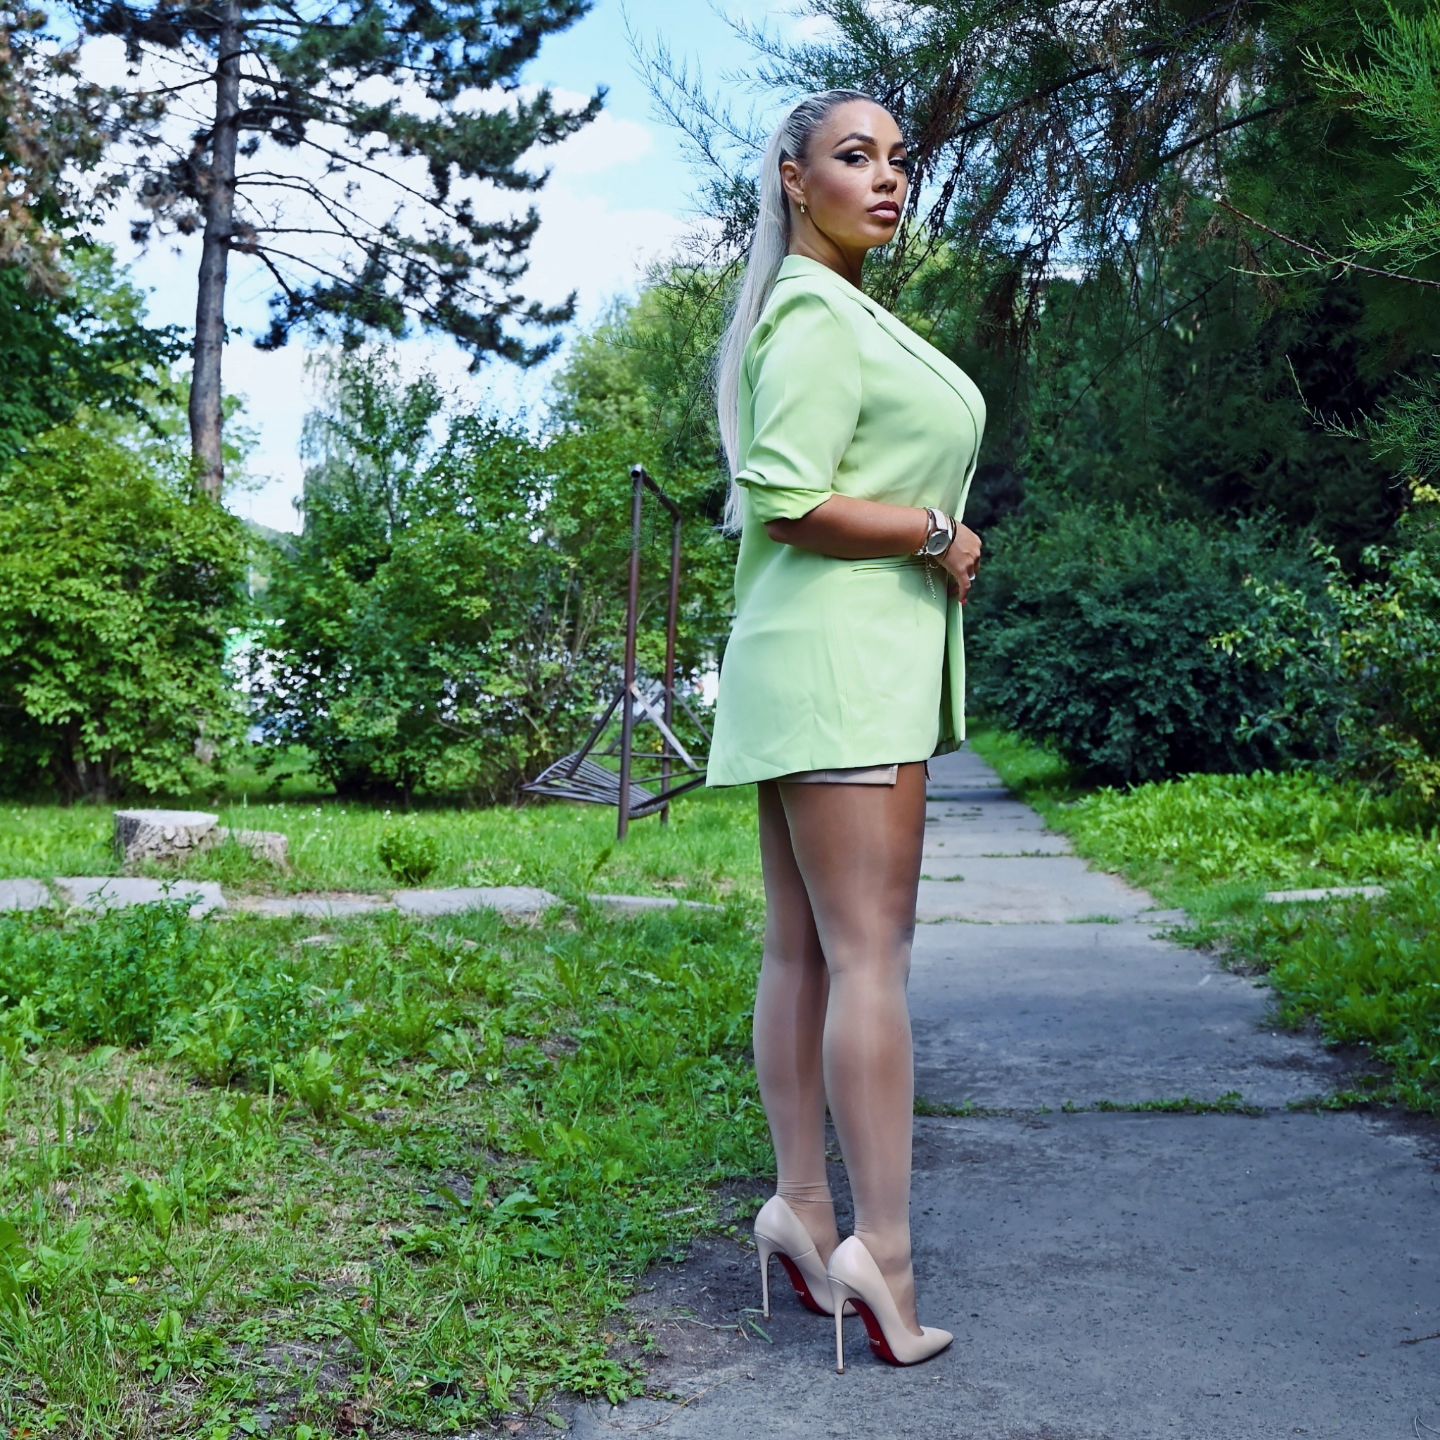 Elegant green - 💚 green business suit + beige mini skirt + white bustier top + nude color glossy pantyhose + beige red soles stiletto high heels.
.
.
.
.
#greenday #greenoutfit #miniskirt #highheelsaddiction #cleavage #centralpark #nudepantyhose #glossypantyhose #shinypantyhose  #streetstyle #strumpfhose #rajstopy #collant